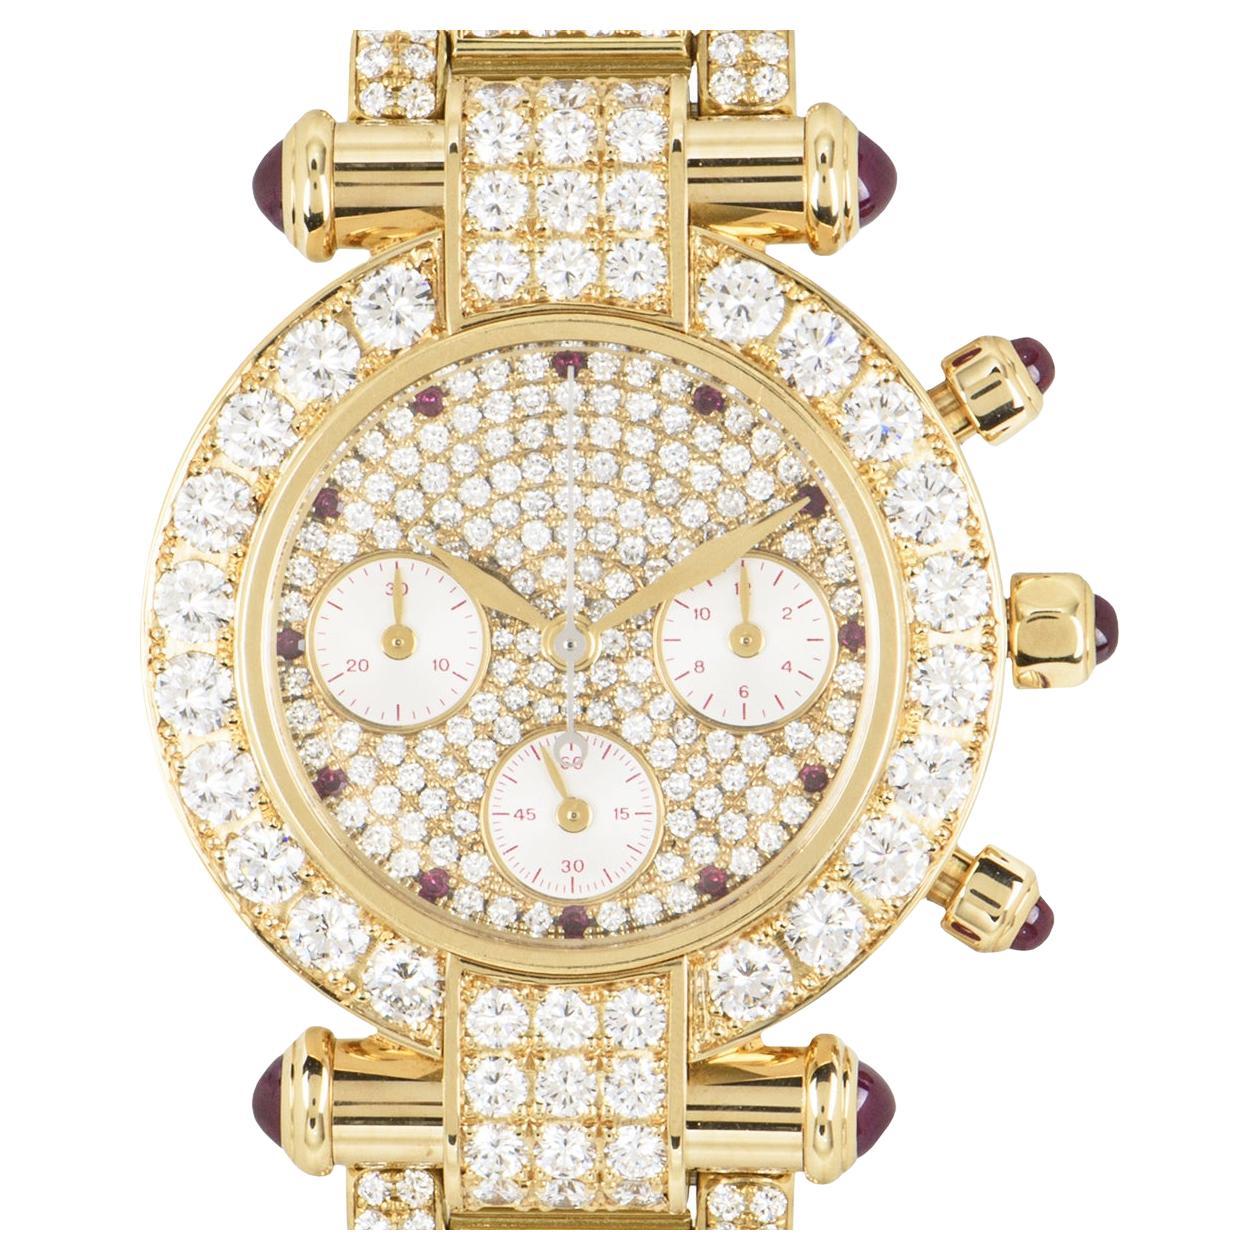 A striking 32mm ladies Imperiale wristwatch, crafted in yellow gold by Chopard. Features a pave diamond dial with 11 round cut ruby hour markers and 3 sub dials. Complementing the dial is a fixed yellow gold bezel and lugs which are set with round